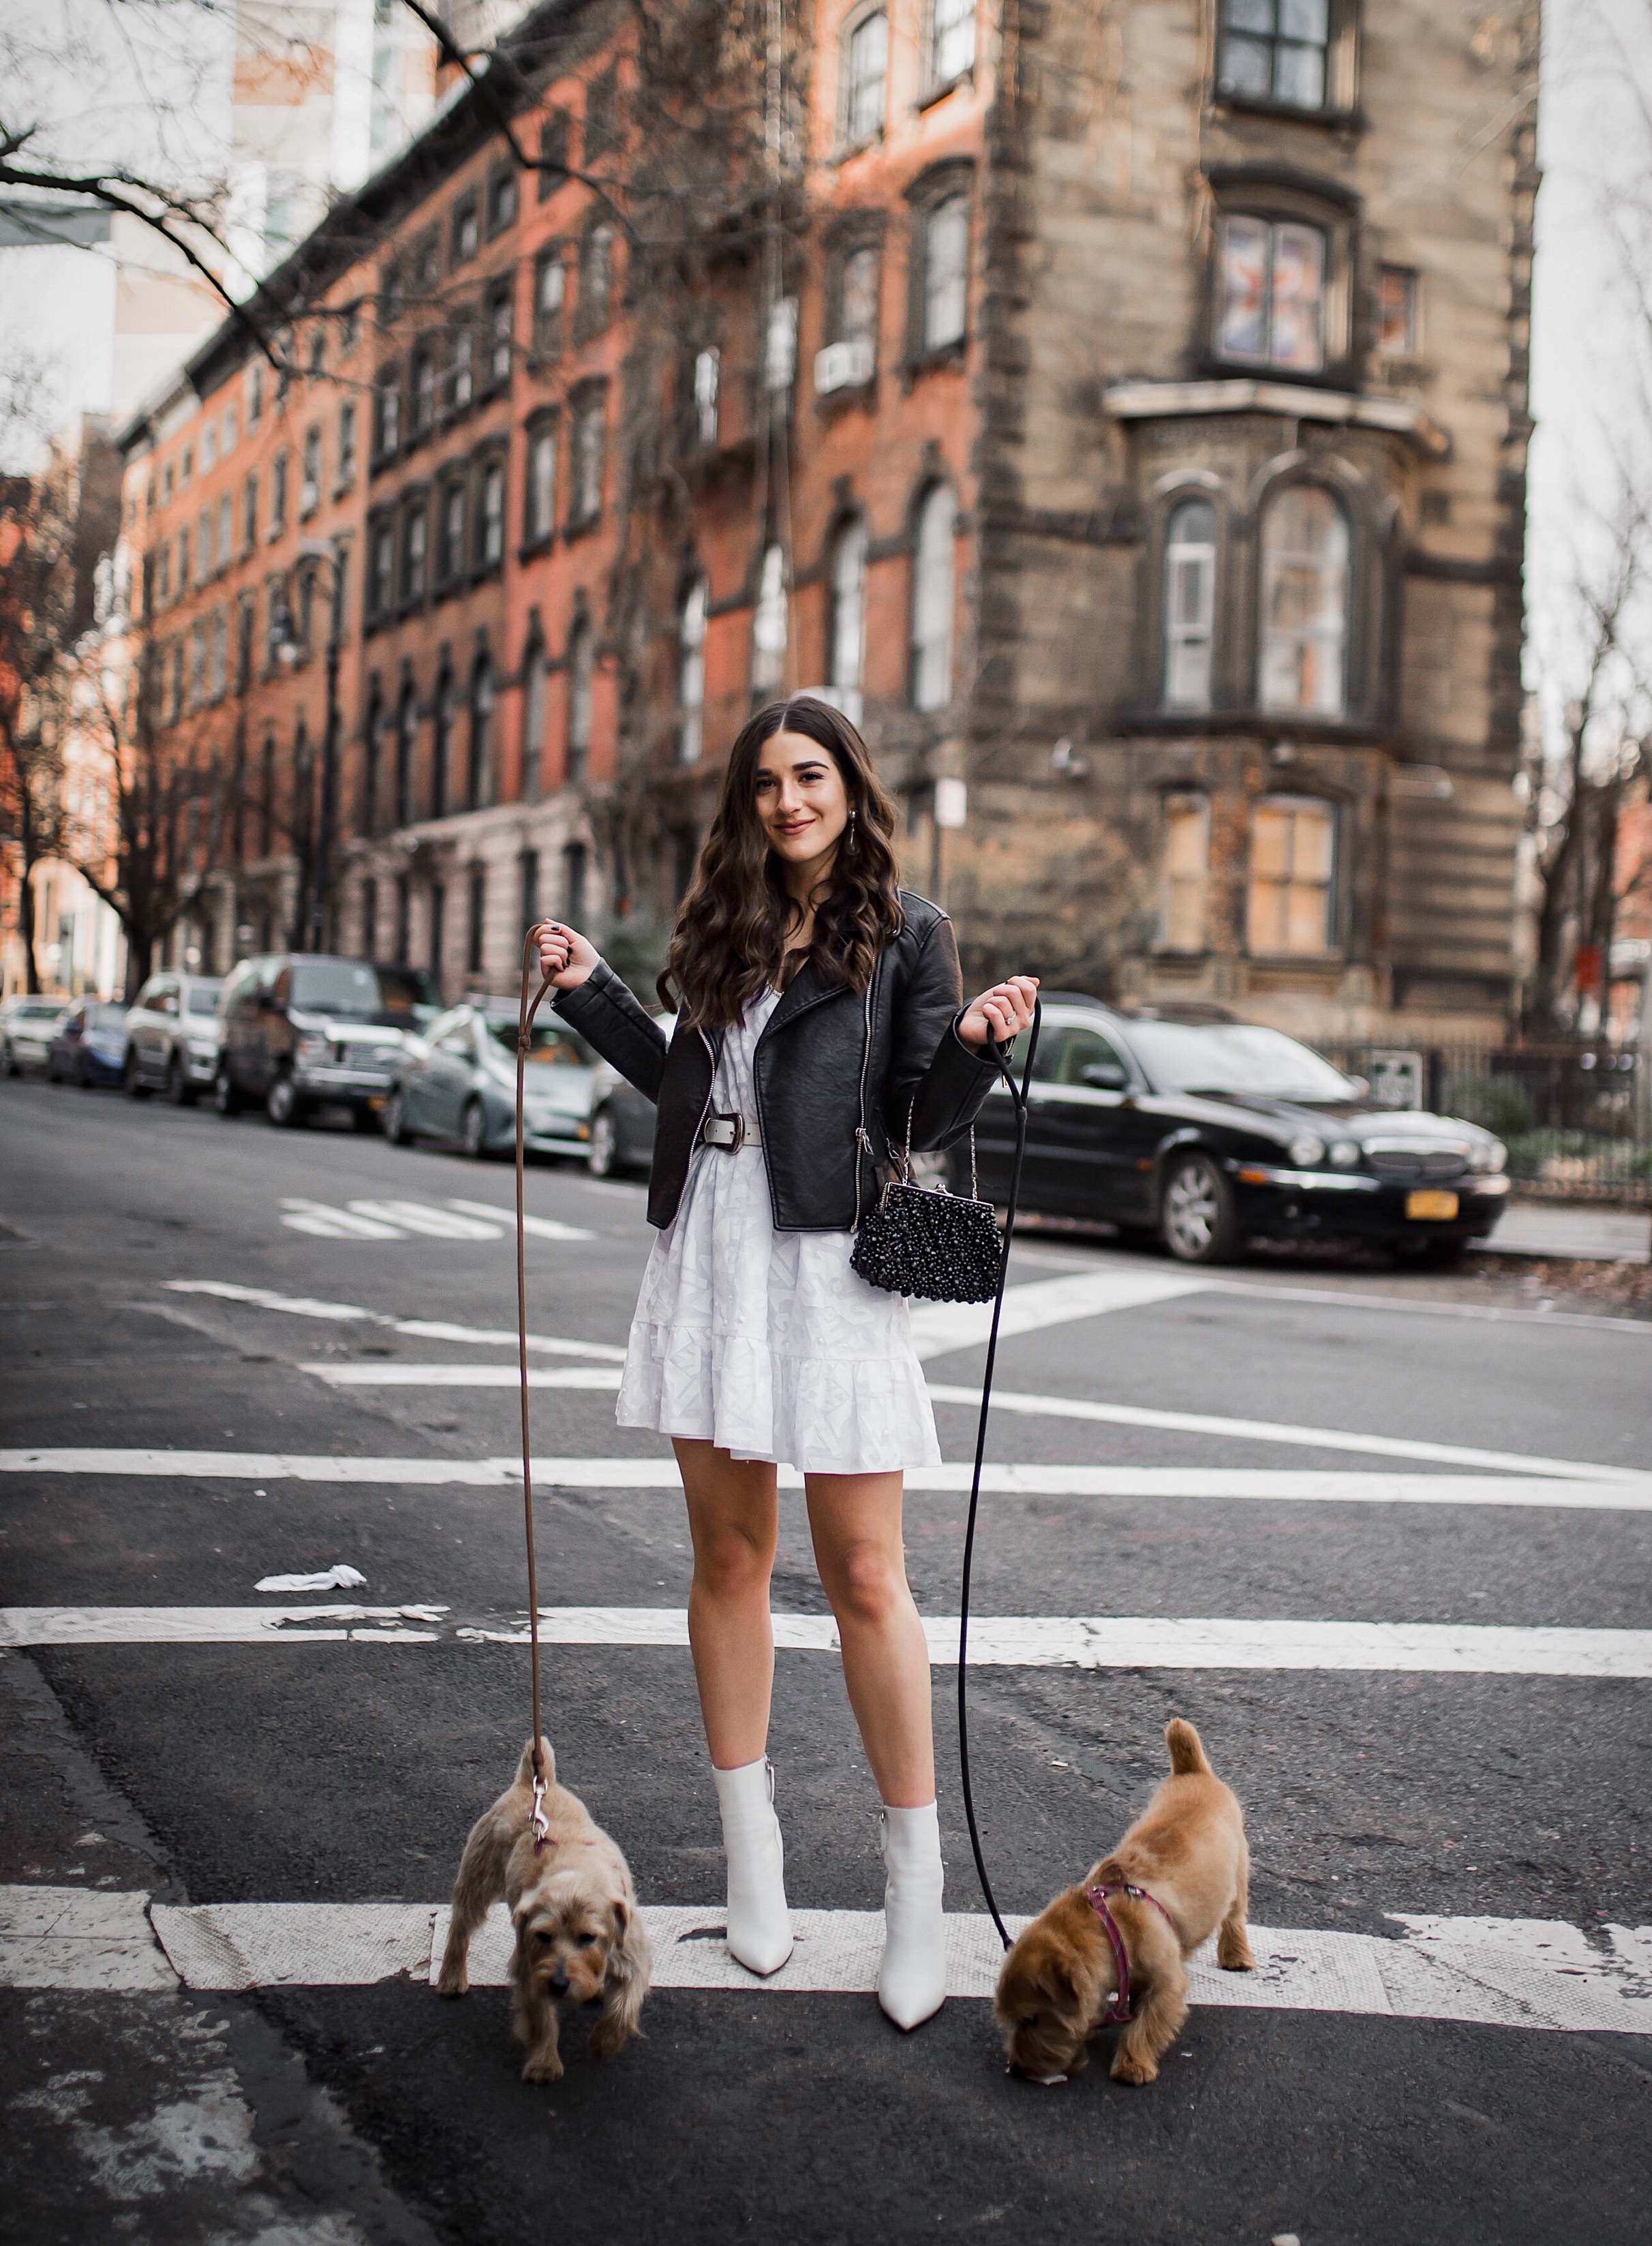 5 Things I Wish Brands Knew White Dress Leather Jacket Esther Santer Fashion Blog NYC Street Style Blogger Outfit OOTD Trendy Shopping Girl What How To Wear Urban Outfitters ASOS Belt Booties Black Beaded Clutch Long Hair  Photoshoot Stuyvesant Dogs.JPG